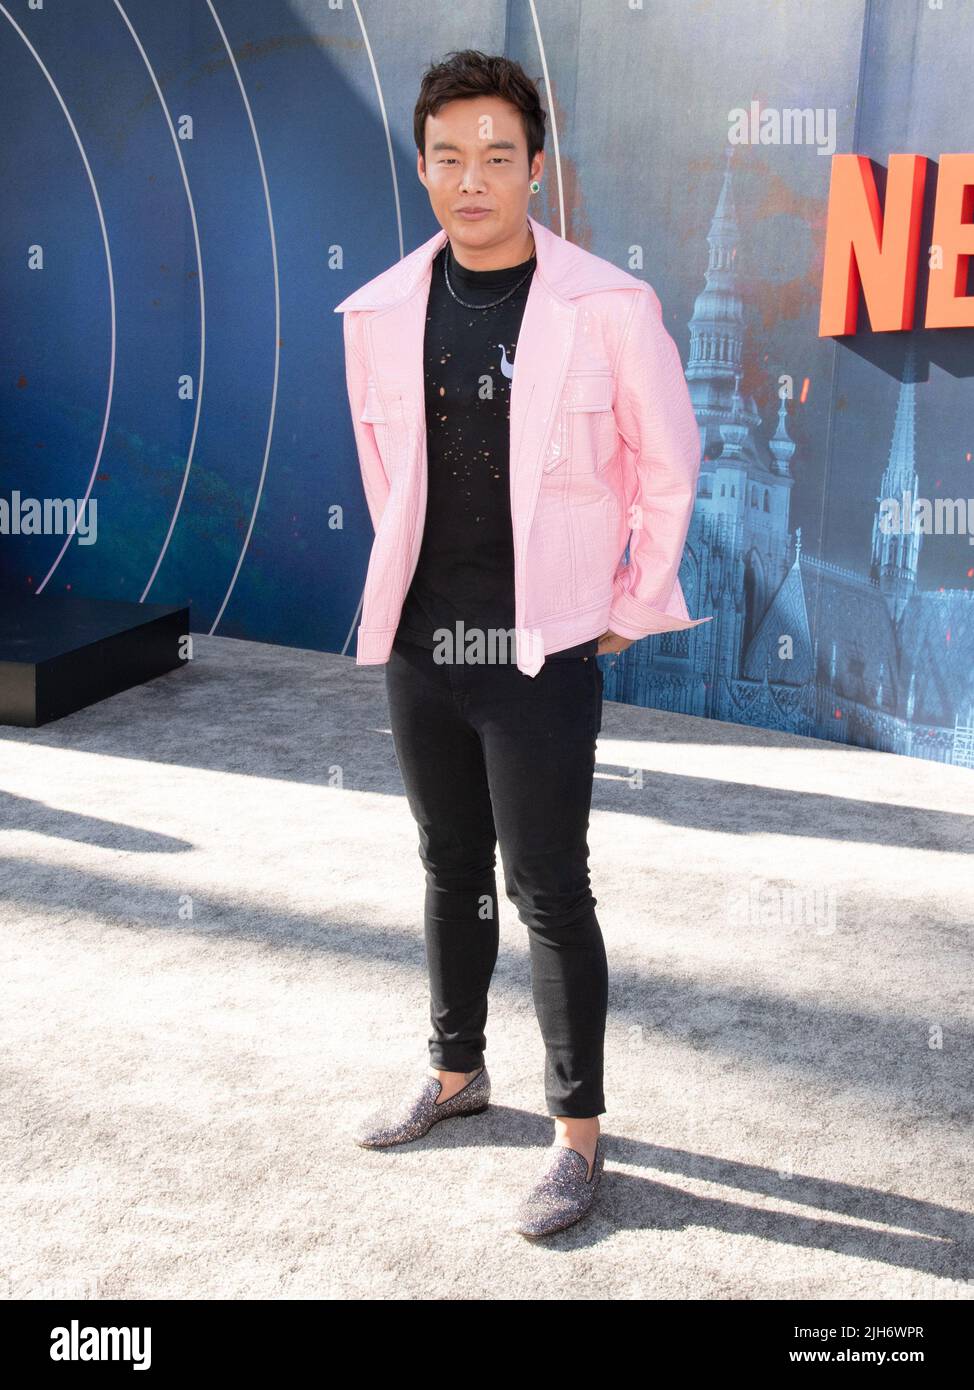 July 13, 2022, Hollywood, California, USA: Kane Lim attends the World ...